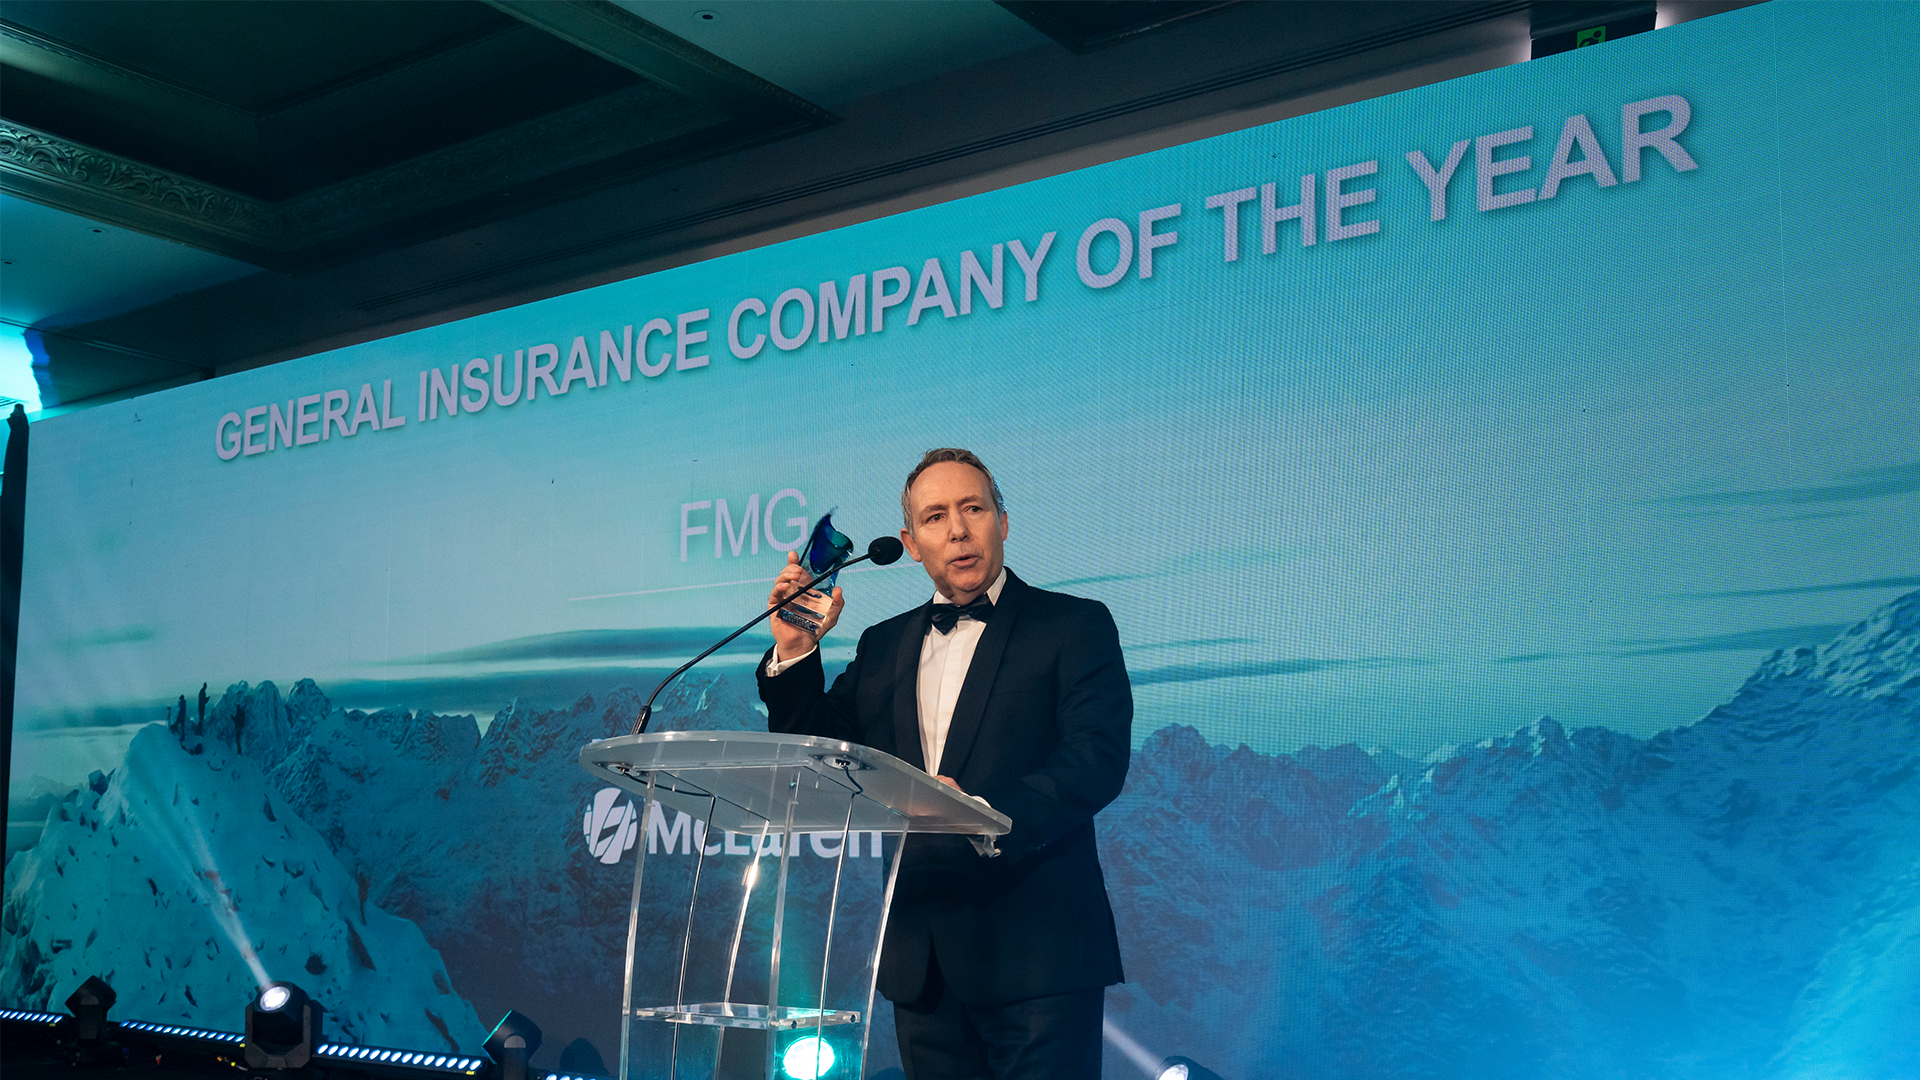 How New Zealand’s General Insurance Company of the Year handles claims in a crisis